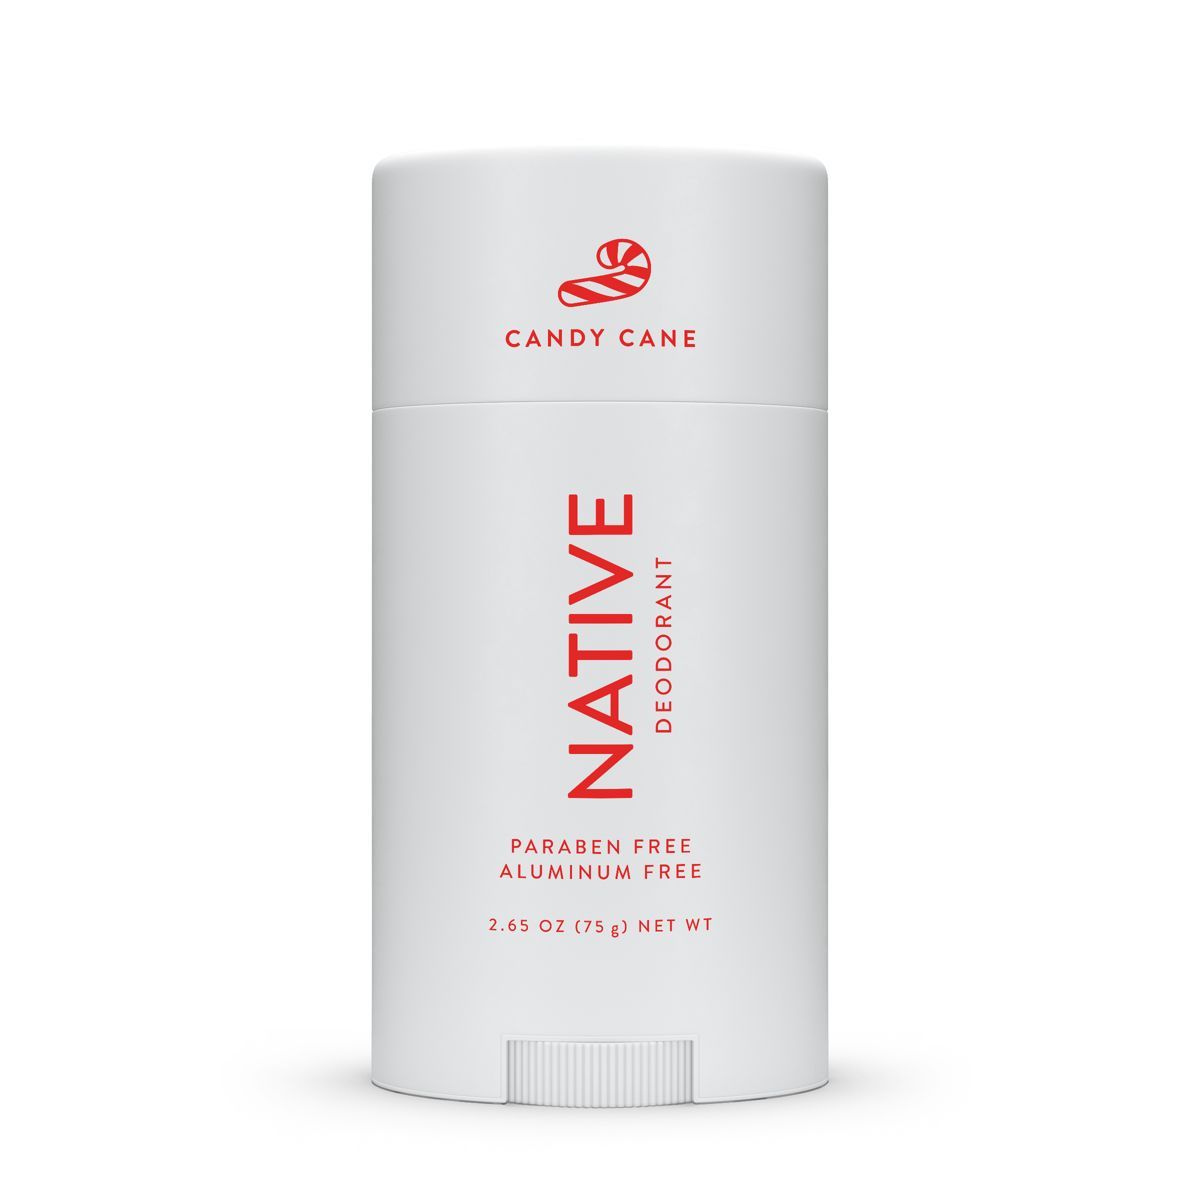 Native Deodorant - Limited Edition Holiday - Candy Cane - Aluminum Free - 2.65 oz | Target